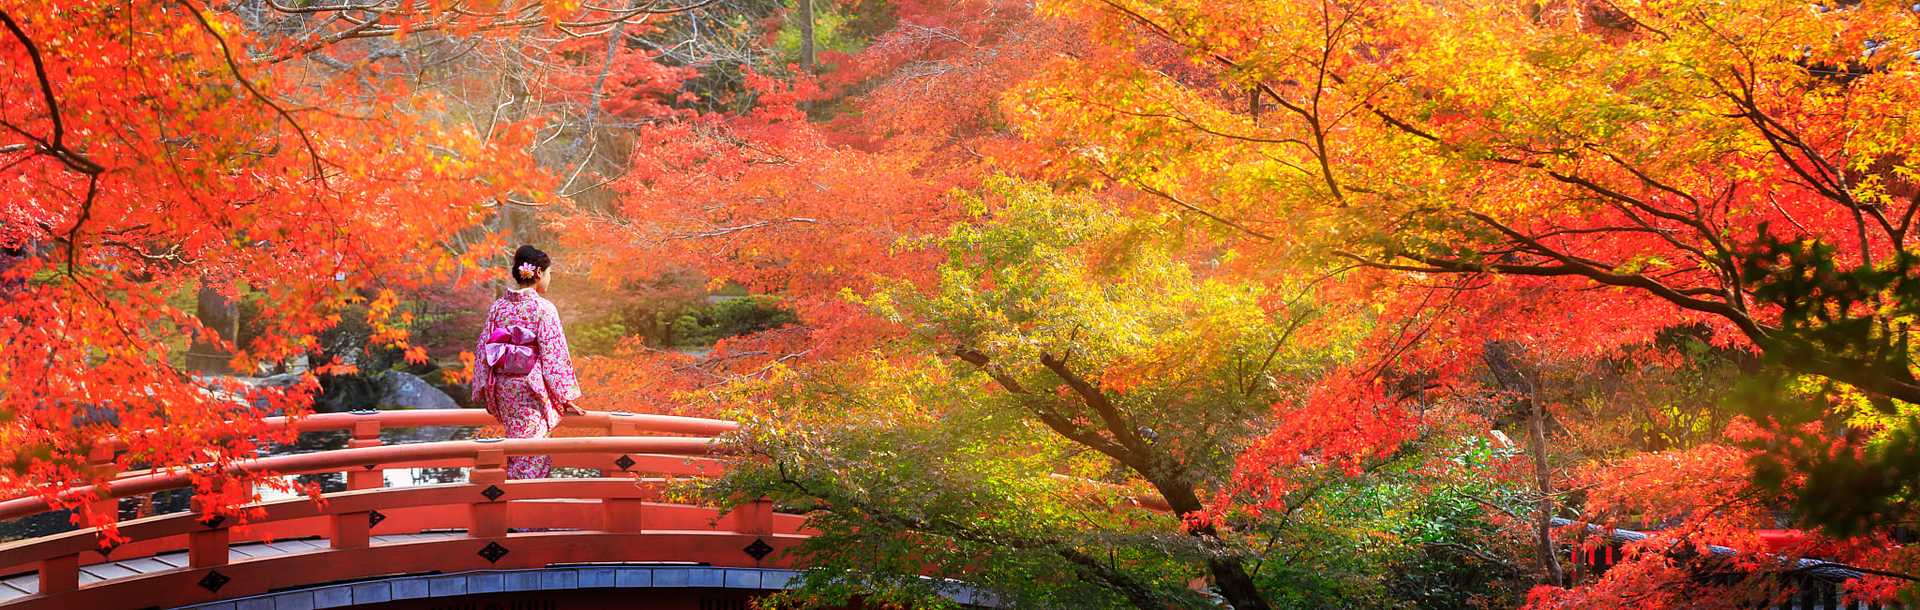 Wooden bridge in the autumn trees in Kyoto, Japan.